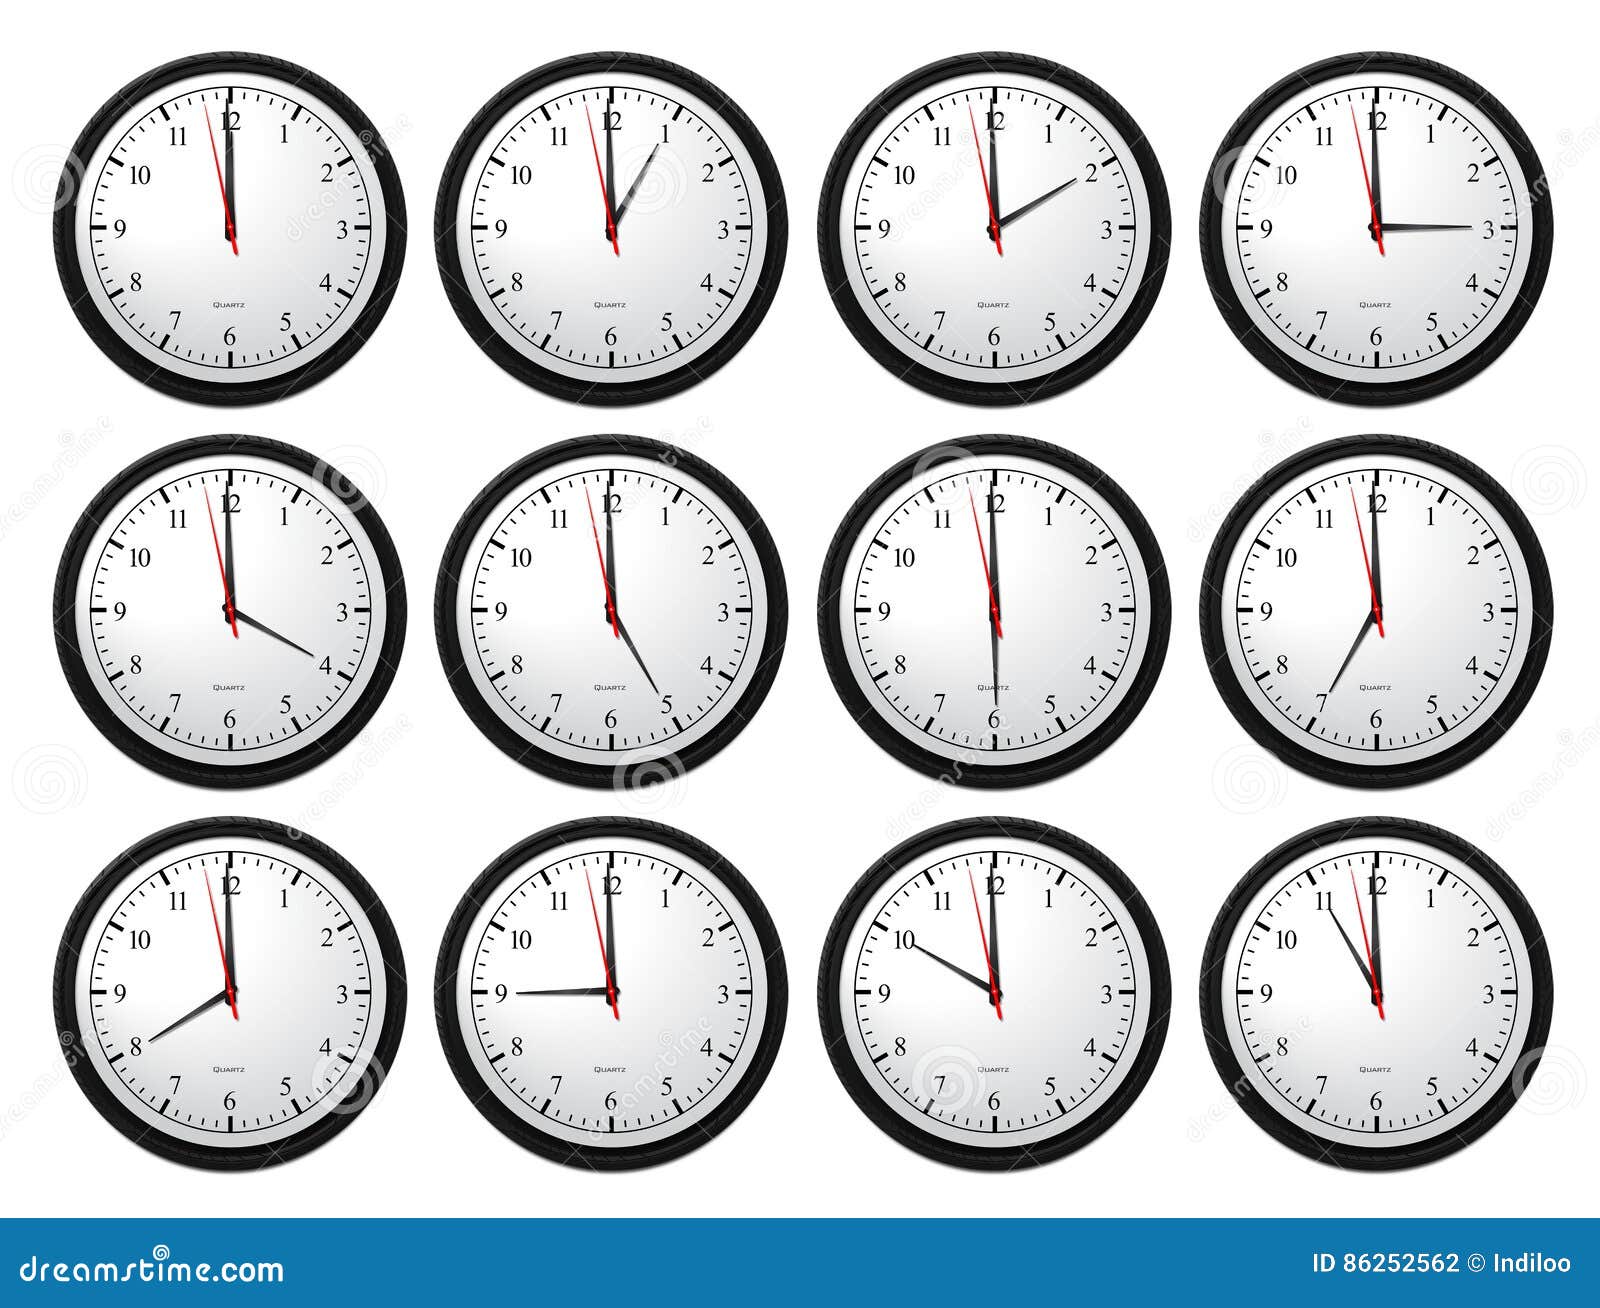 set-of-clocks-showing-the-time-difference-in-different-time-zones